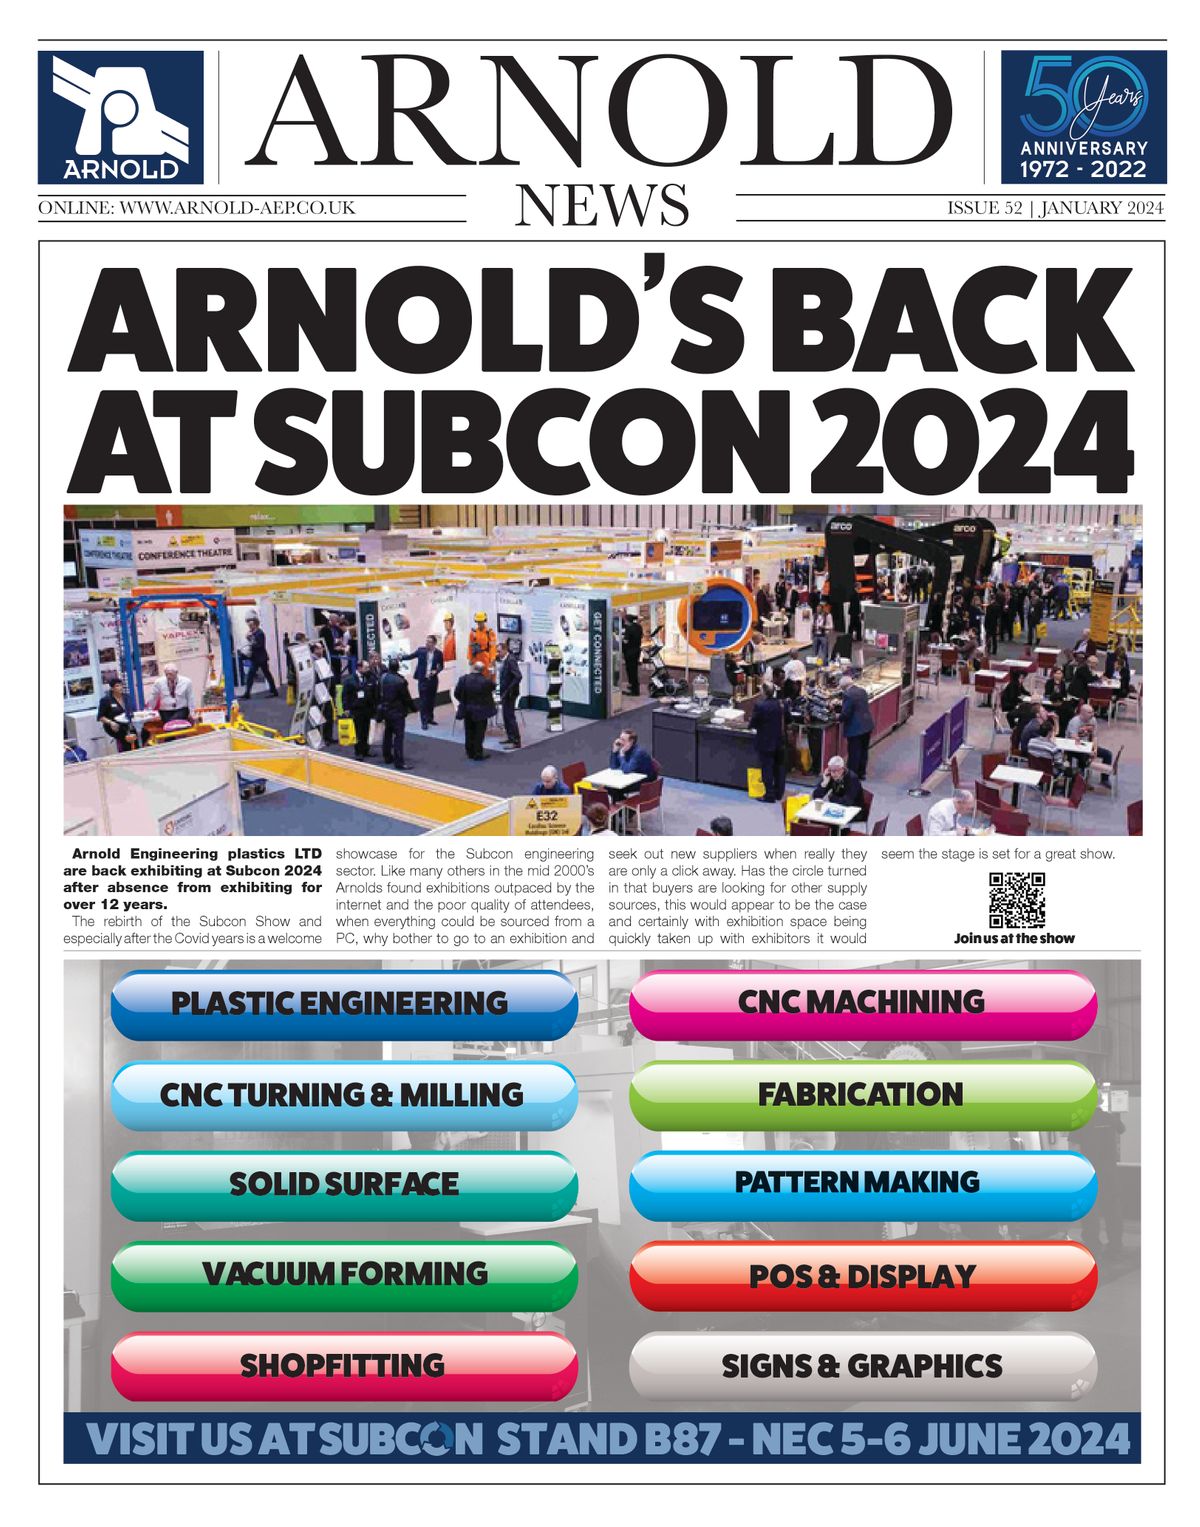 Arnold's Back At Subcon 2024